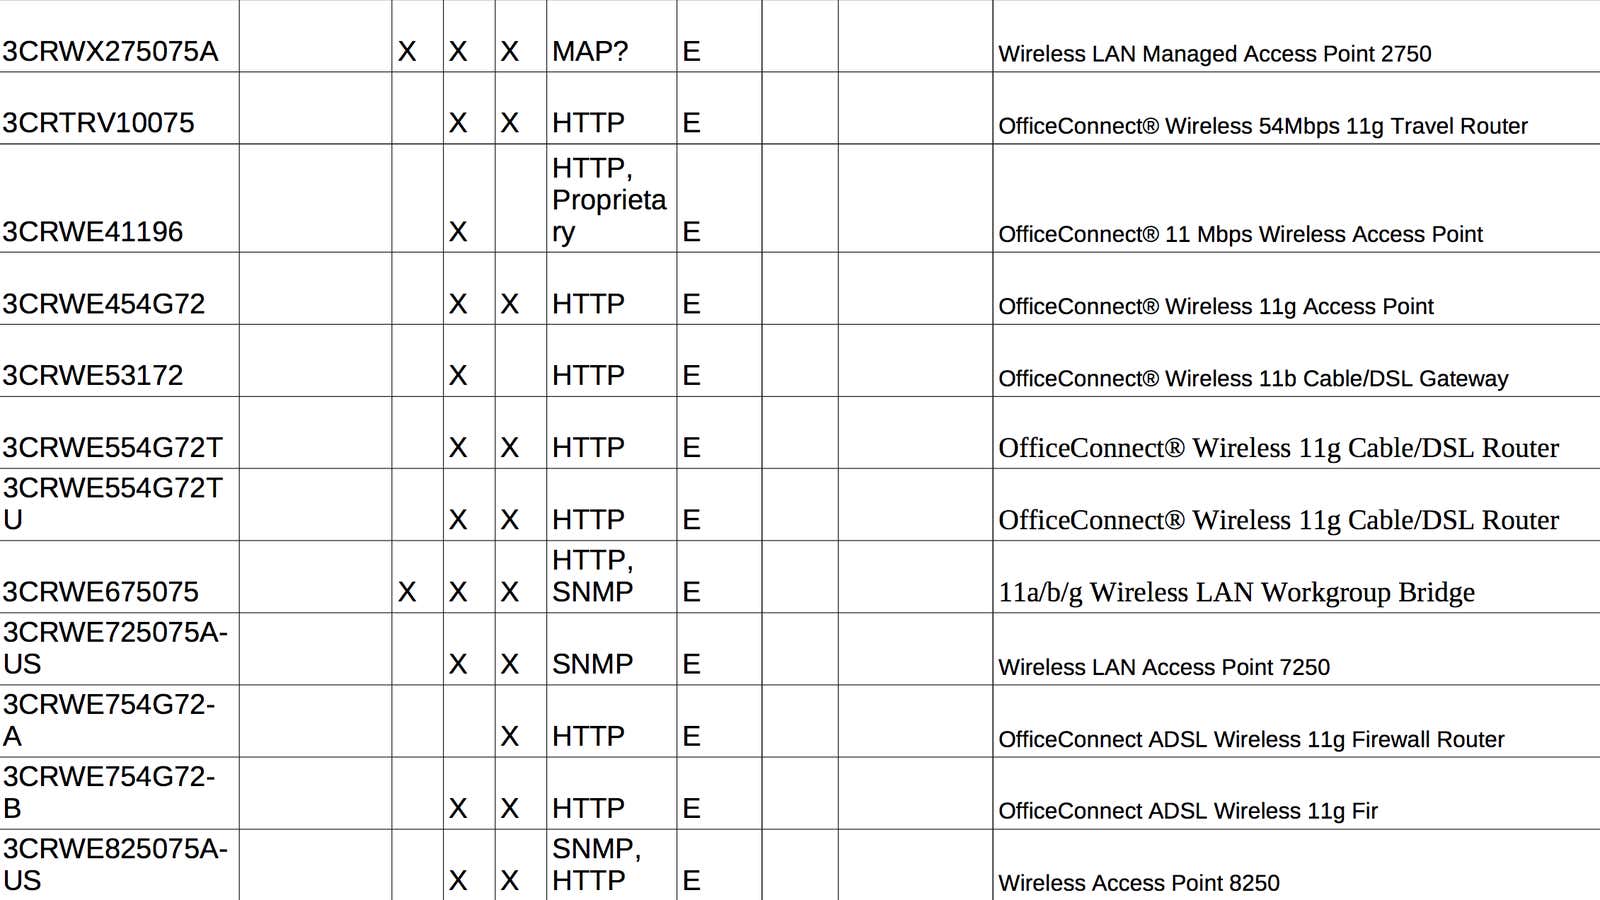 A partial list of routers targeted by CherryBlossom